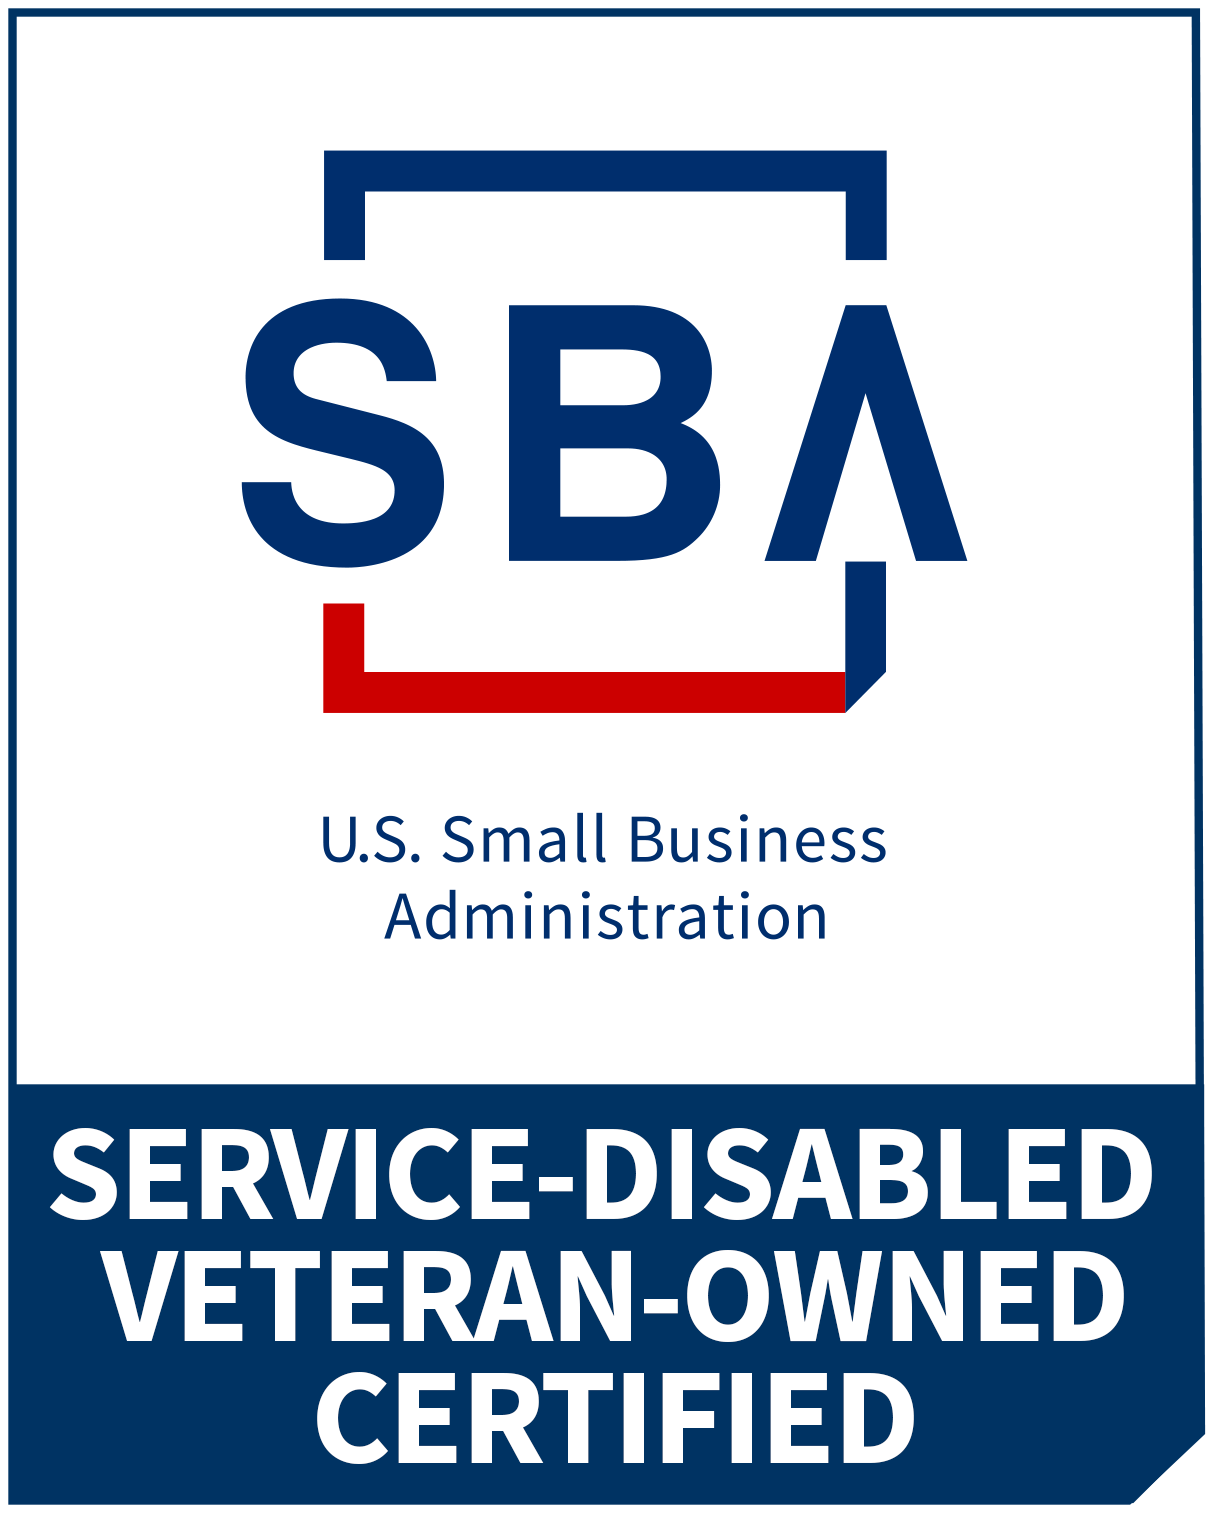 Service-Disabled Veteran-Owned-Certified.png